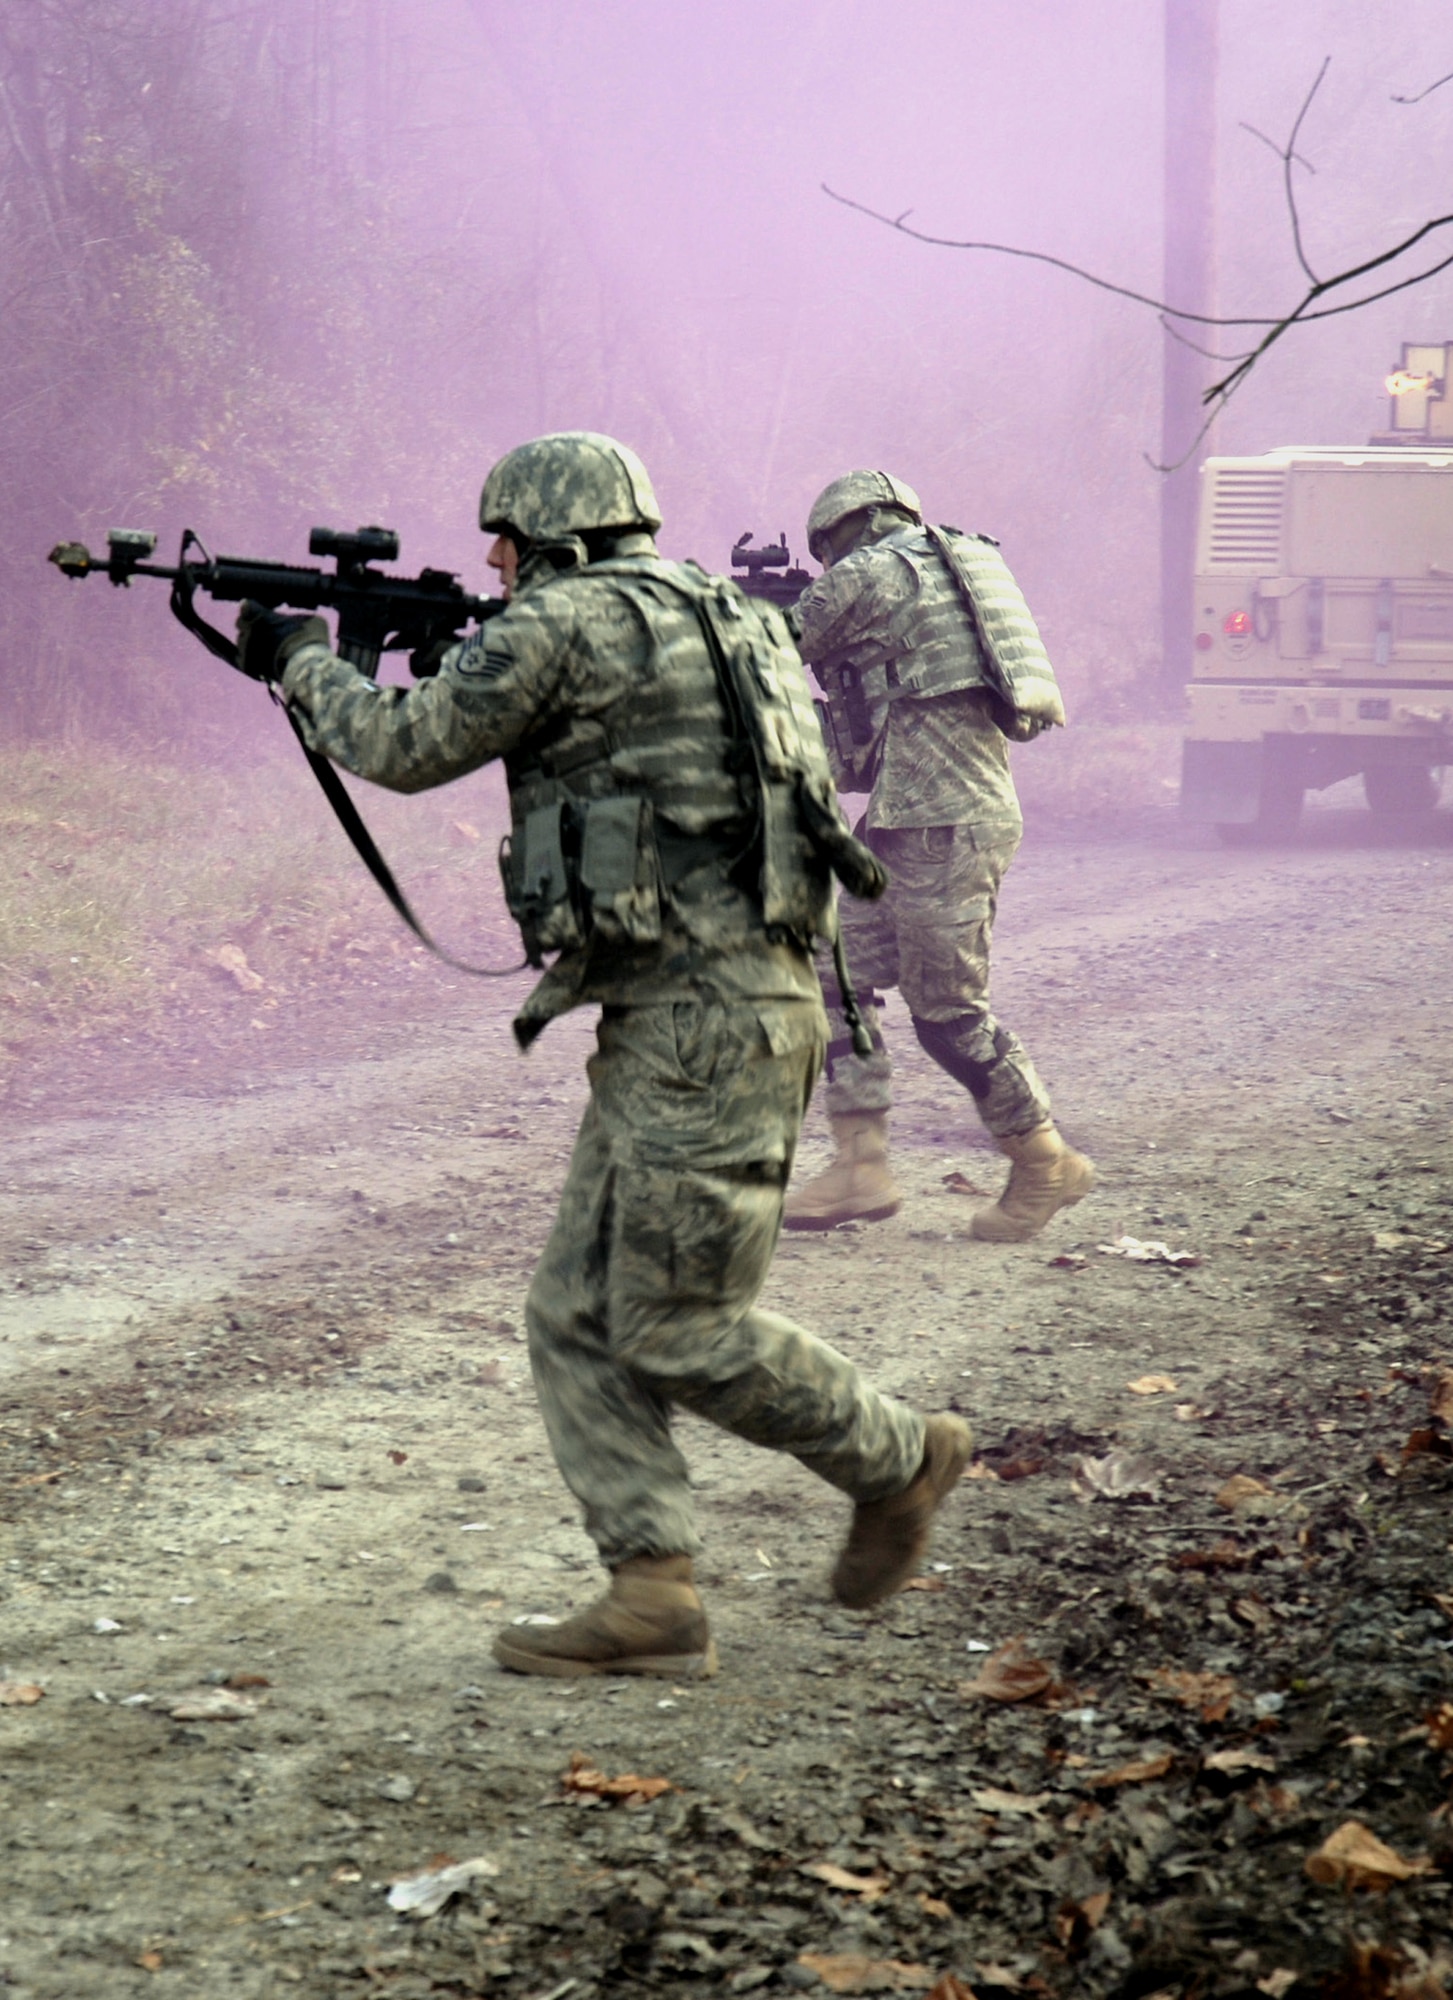 Students in the Air Force Phoenix Warrior Training Course responds to "enemy action" during mounted and dismounted patrol (convoy) training on a Fort Dix, N.J., range Dec. 5, 2008.  The course, taught by the U.S. Air Force Expeditionary Center's 421st Combat Training Squadron, prepares Air Force security forces for upcoming deployments.  (U.S. Air Force Photo/Staff Sgt. Paul R. Evans)